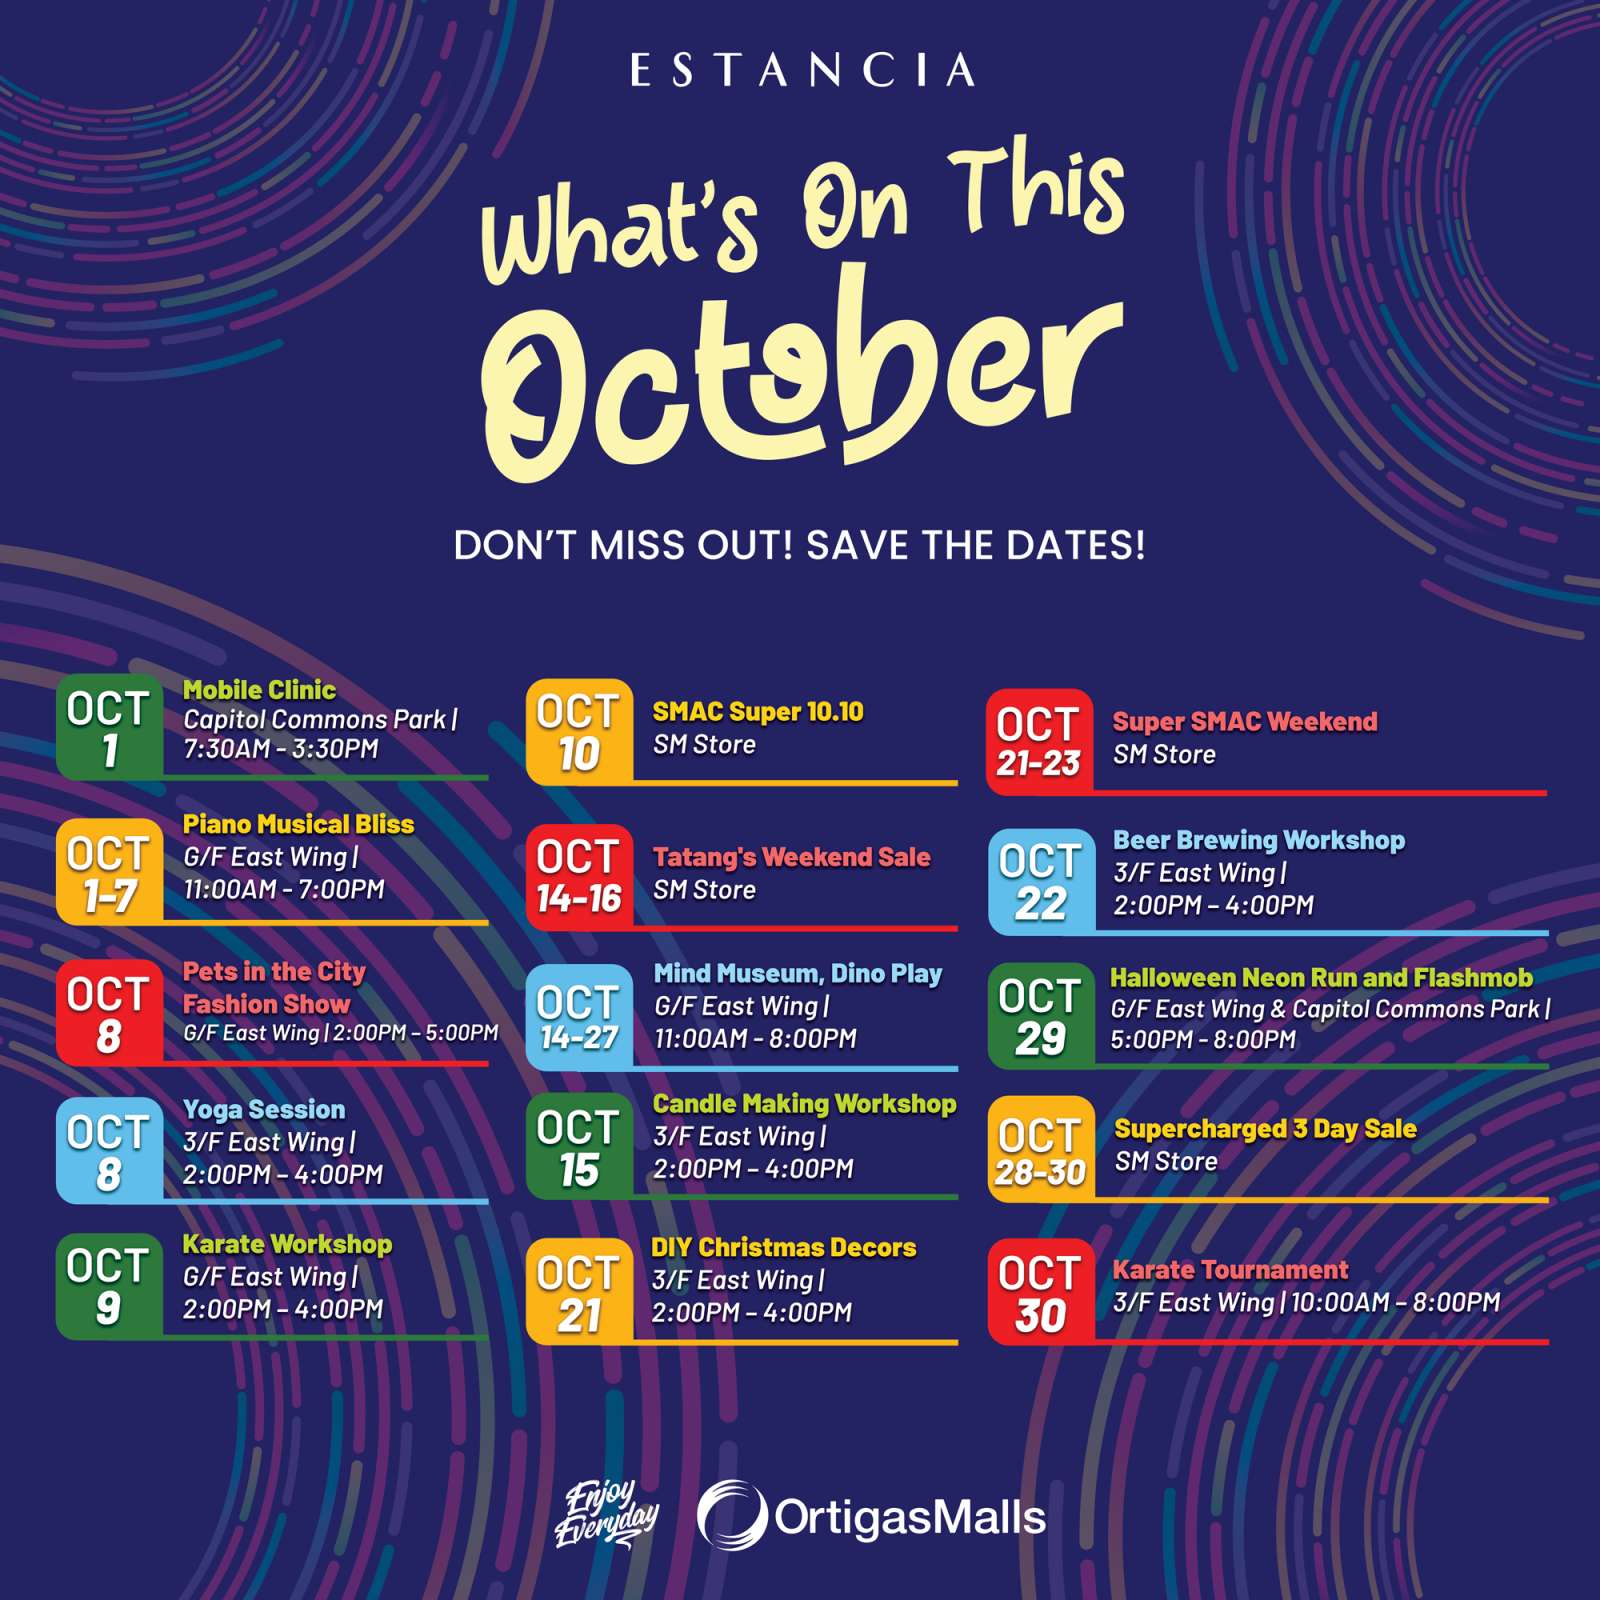 Get ready for these exciting events at Ortigas Malls this October